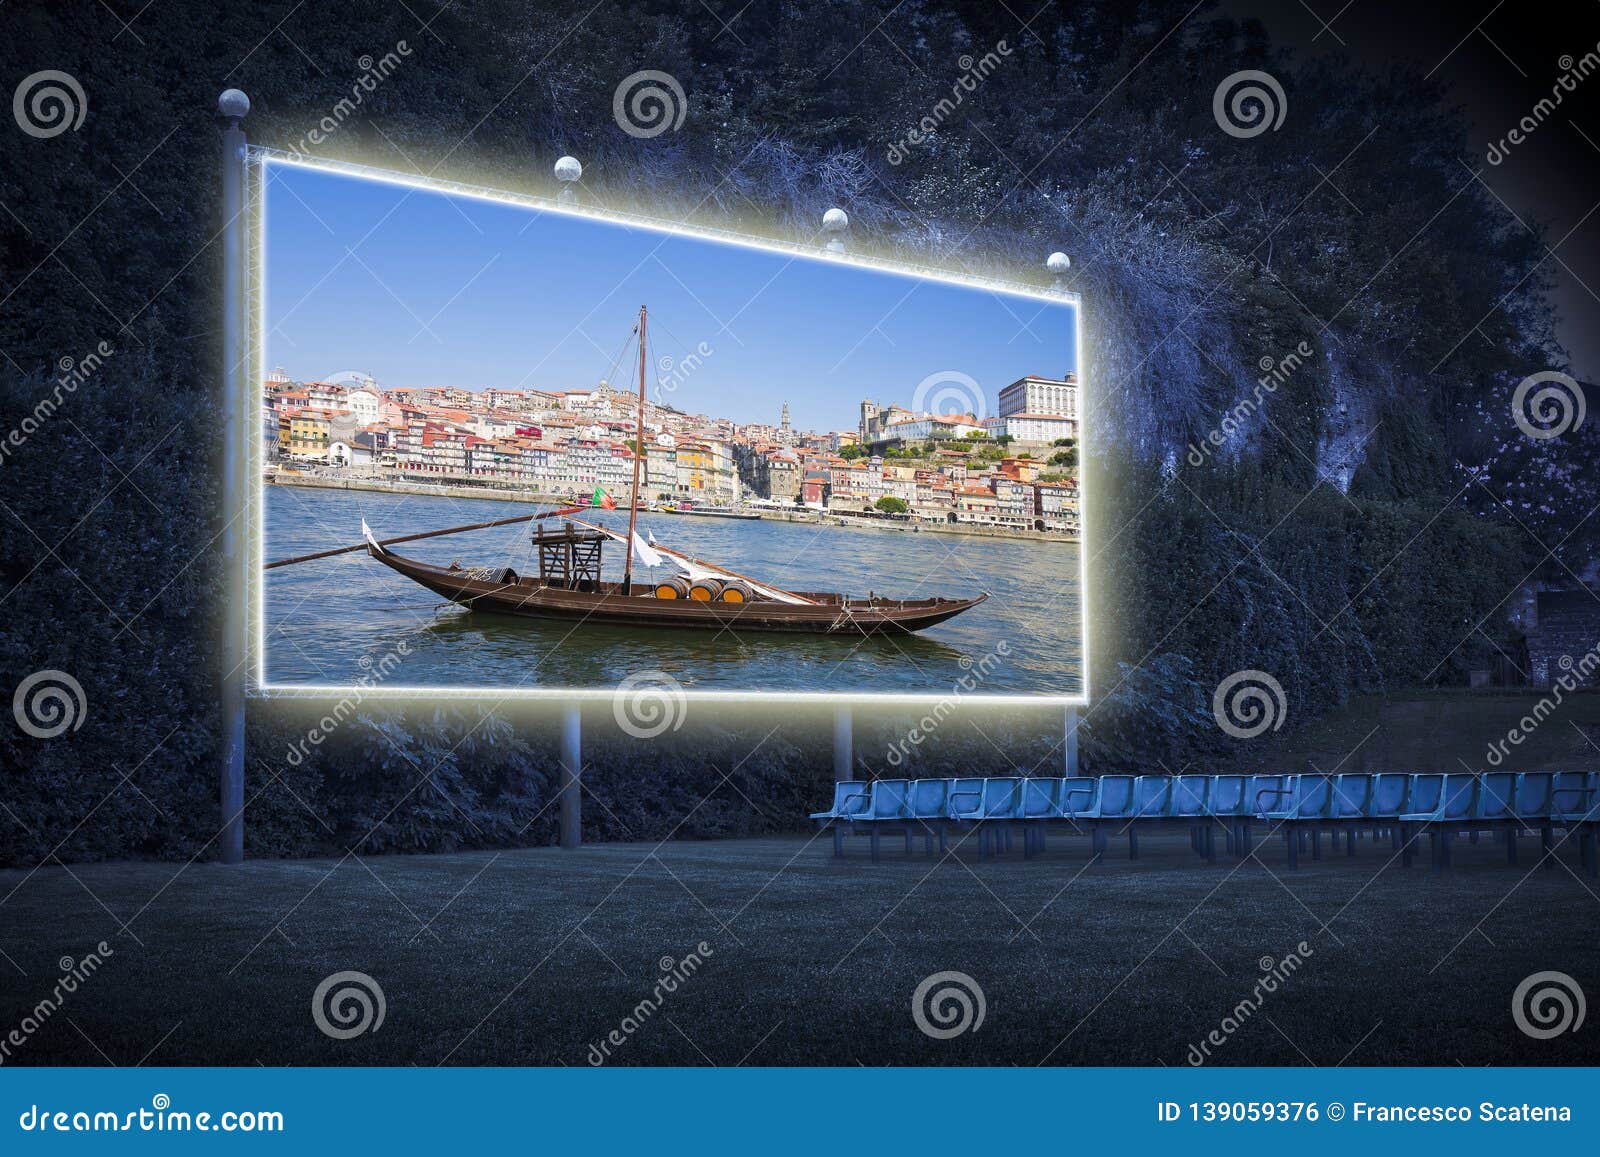 typical portuguese wooden boats, called -barcos rabelos- used in the past to transport the famous port wine towards the cellars of